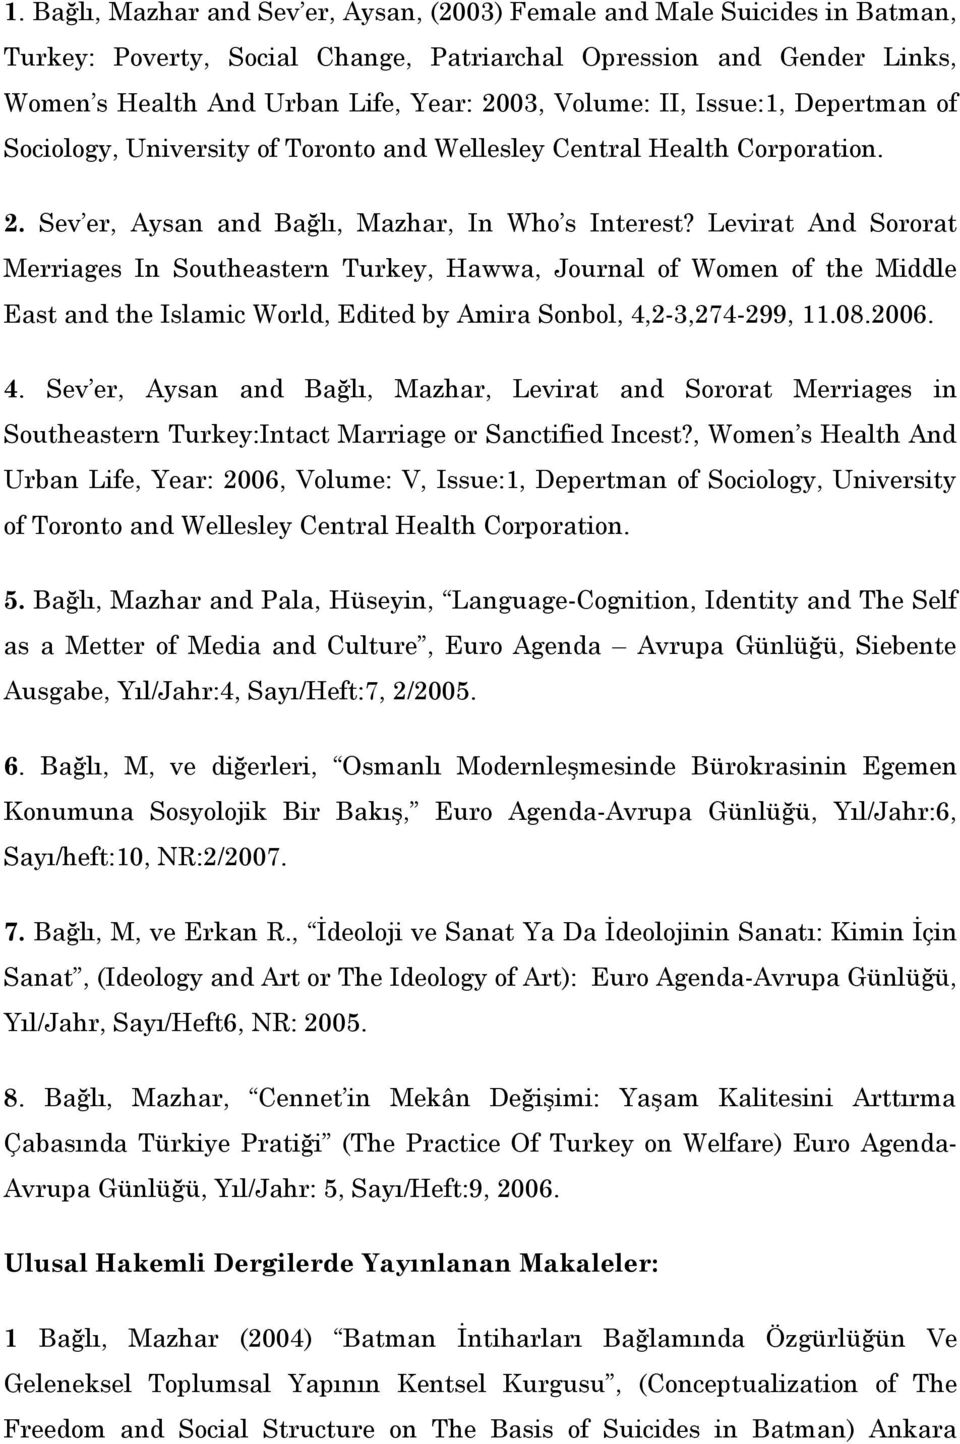 Levirat And Sororat Merriages In Southeastern Turkey, Hawwa, Journal of Women of the Middle East and the Islamic World, Edited by Amira Sonbol, 4,